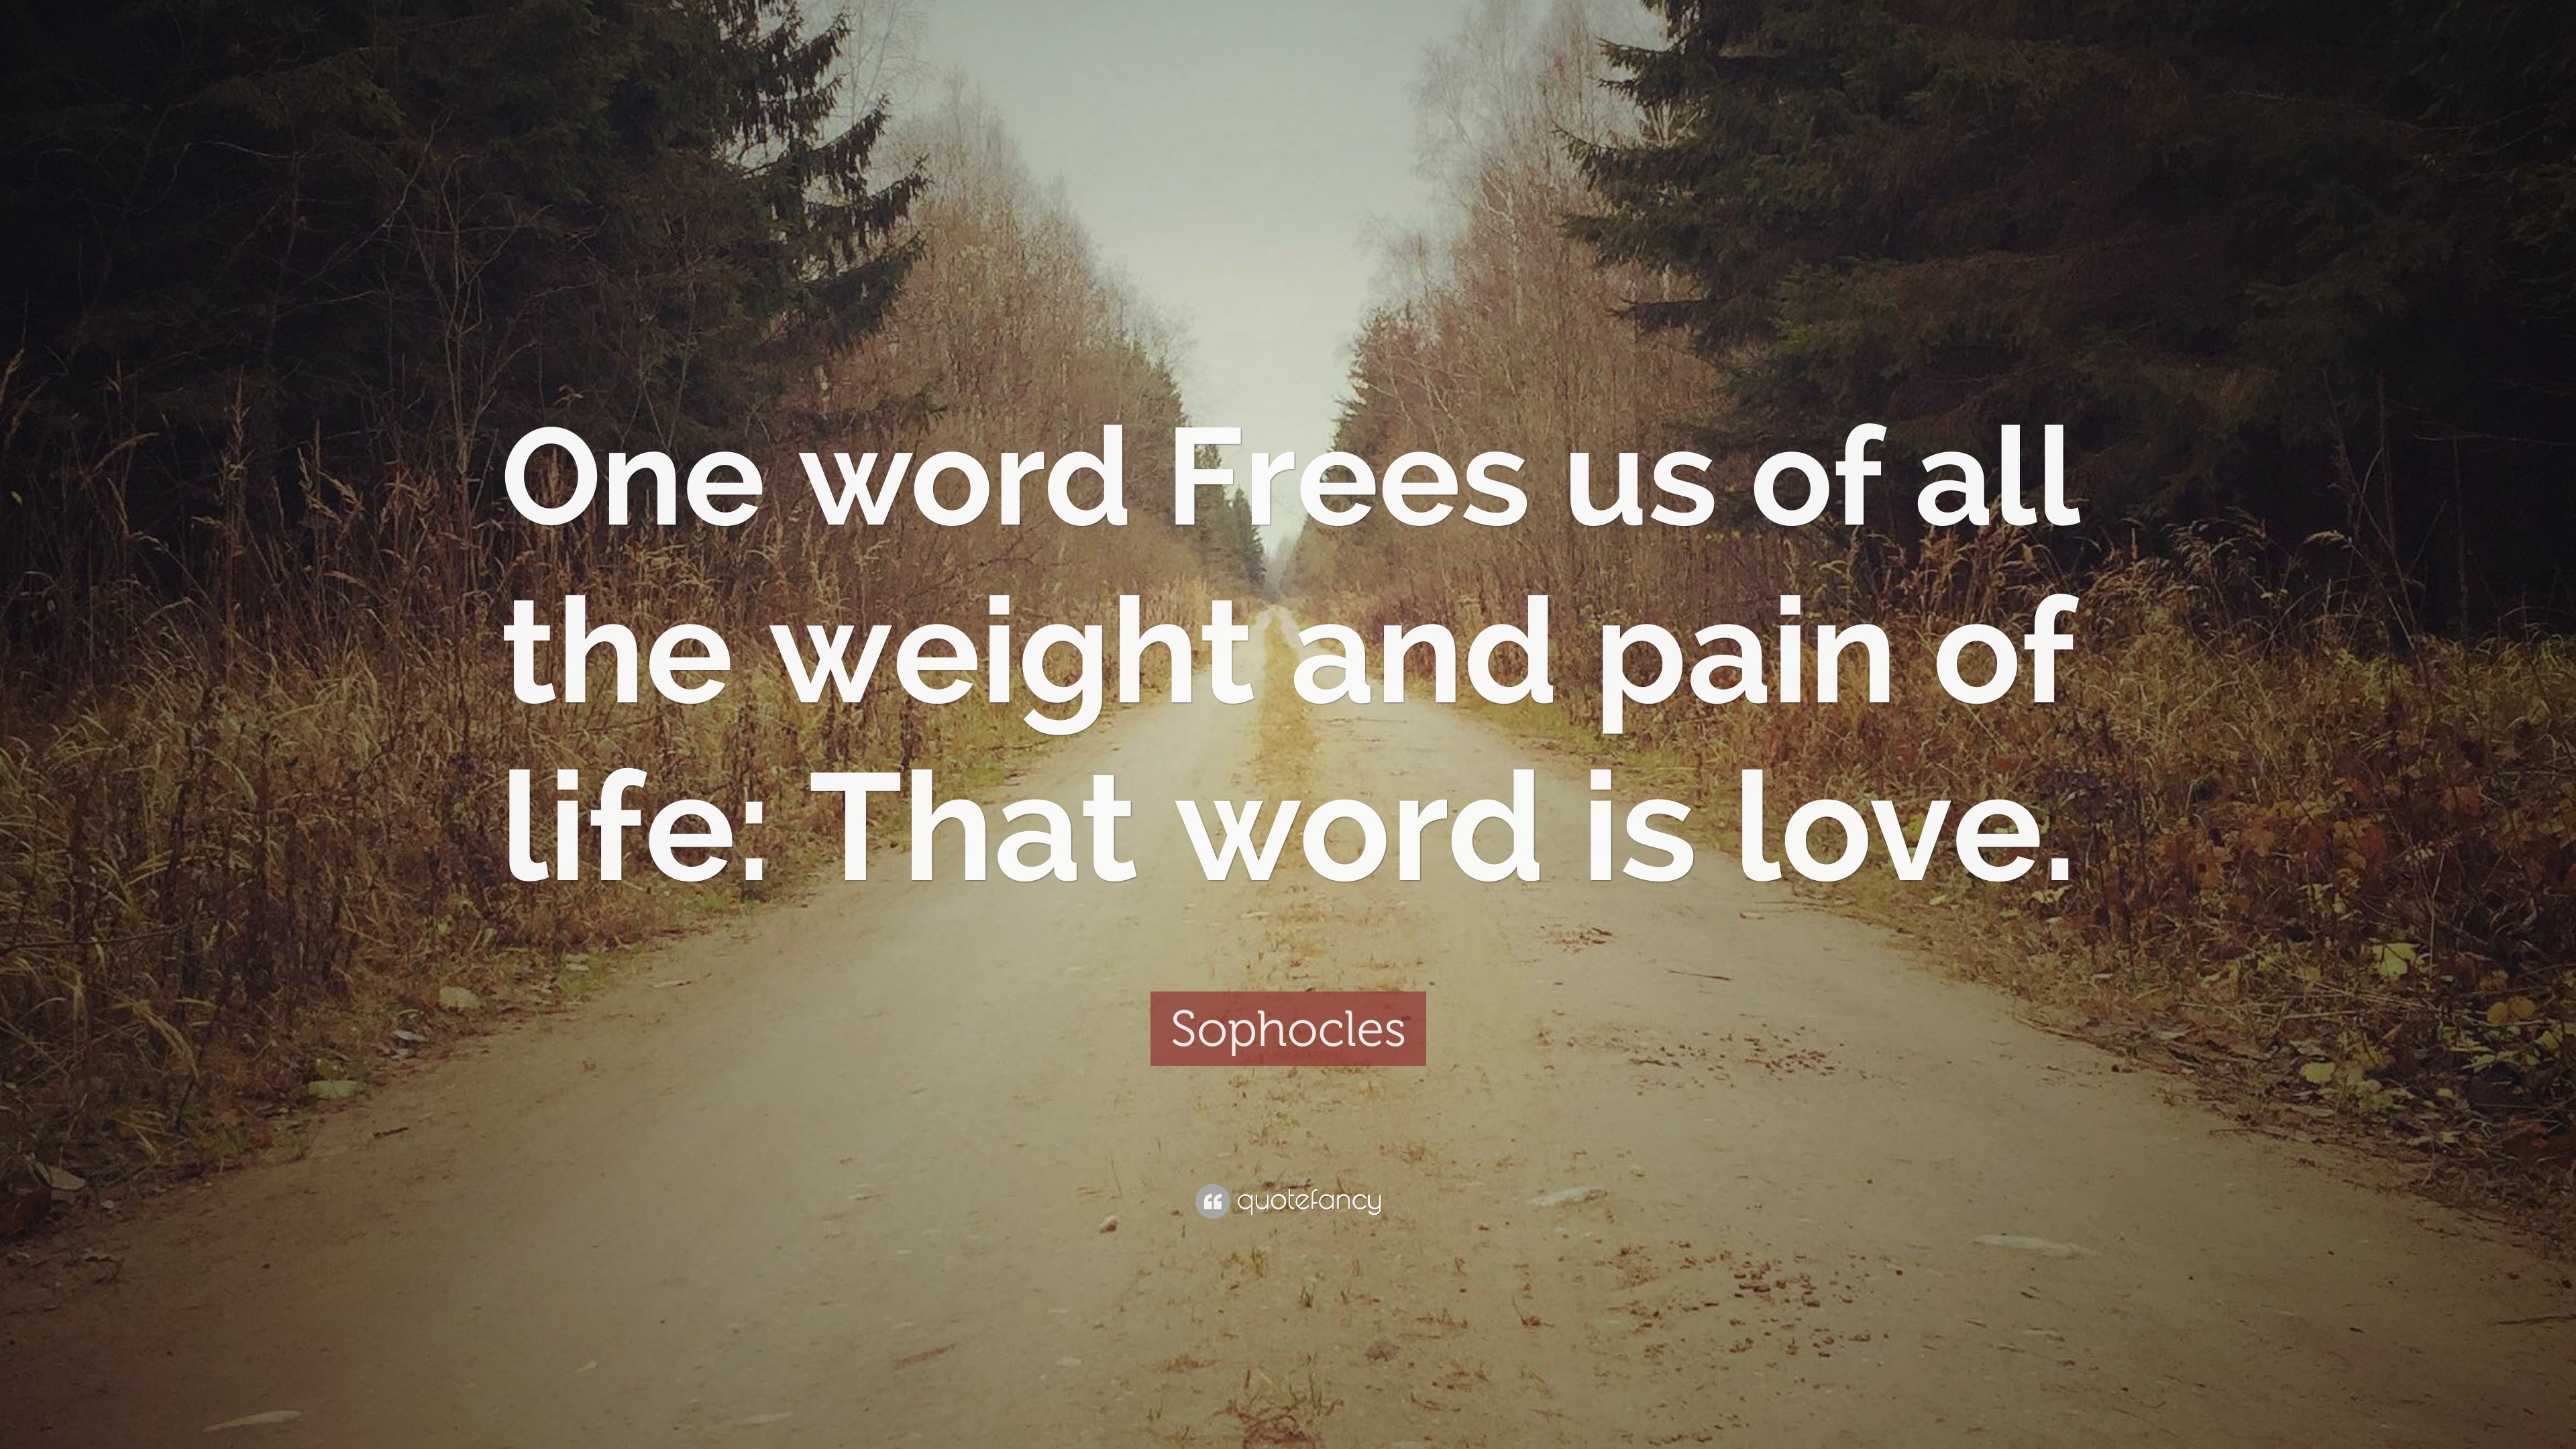 Sophocles Quote “ e word Frees us of all the weight and pain of life